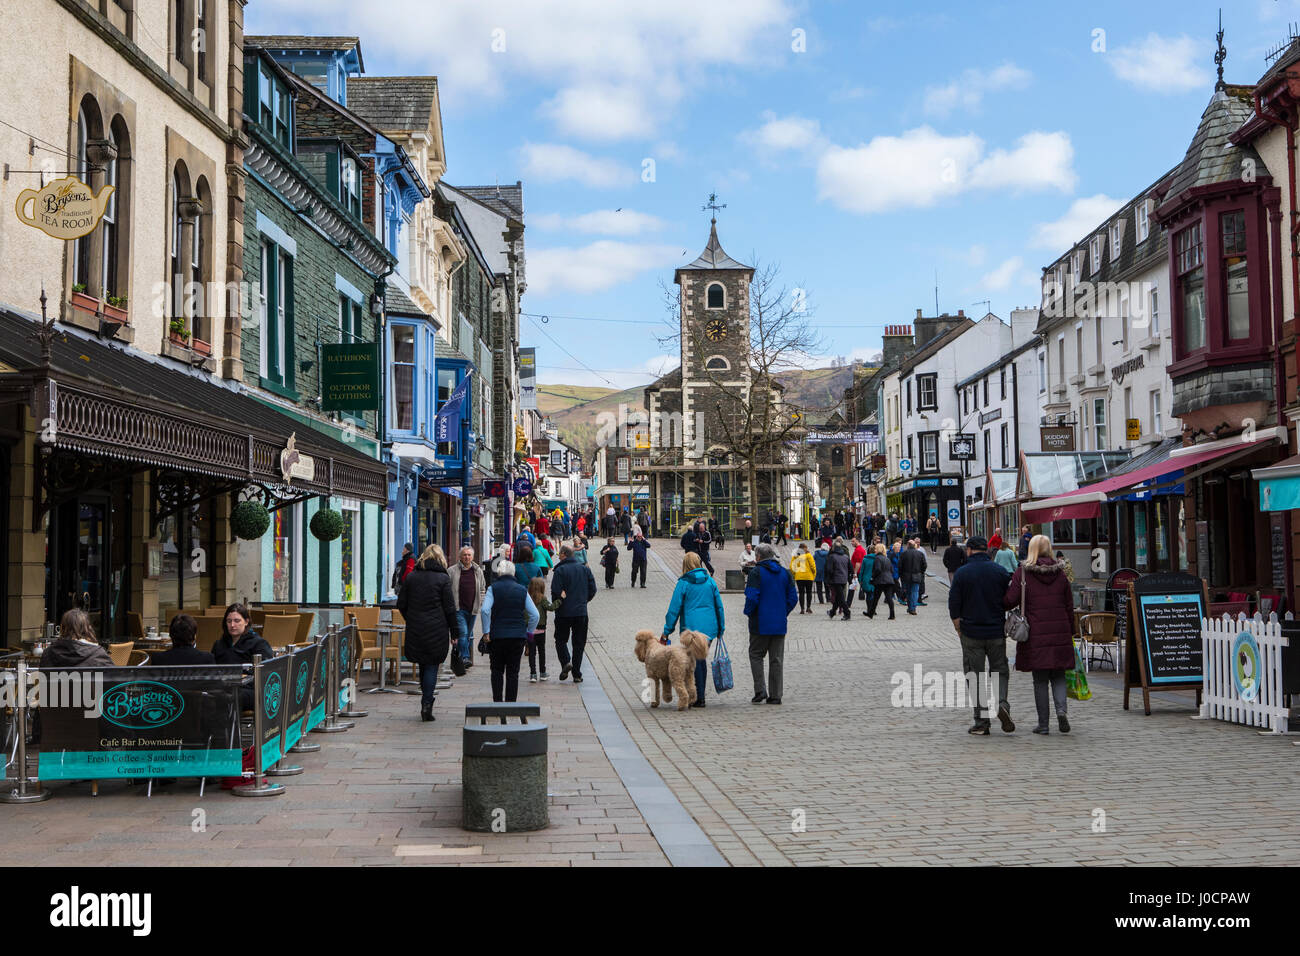 KESWICK, UK - APRIL 7TH 2017: The beautiful town centre in Keswick, located in the Lake District in Cumbria, UK, on 7th April 2017. Stock Photo